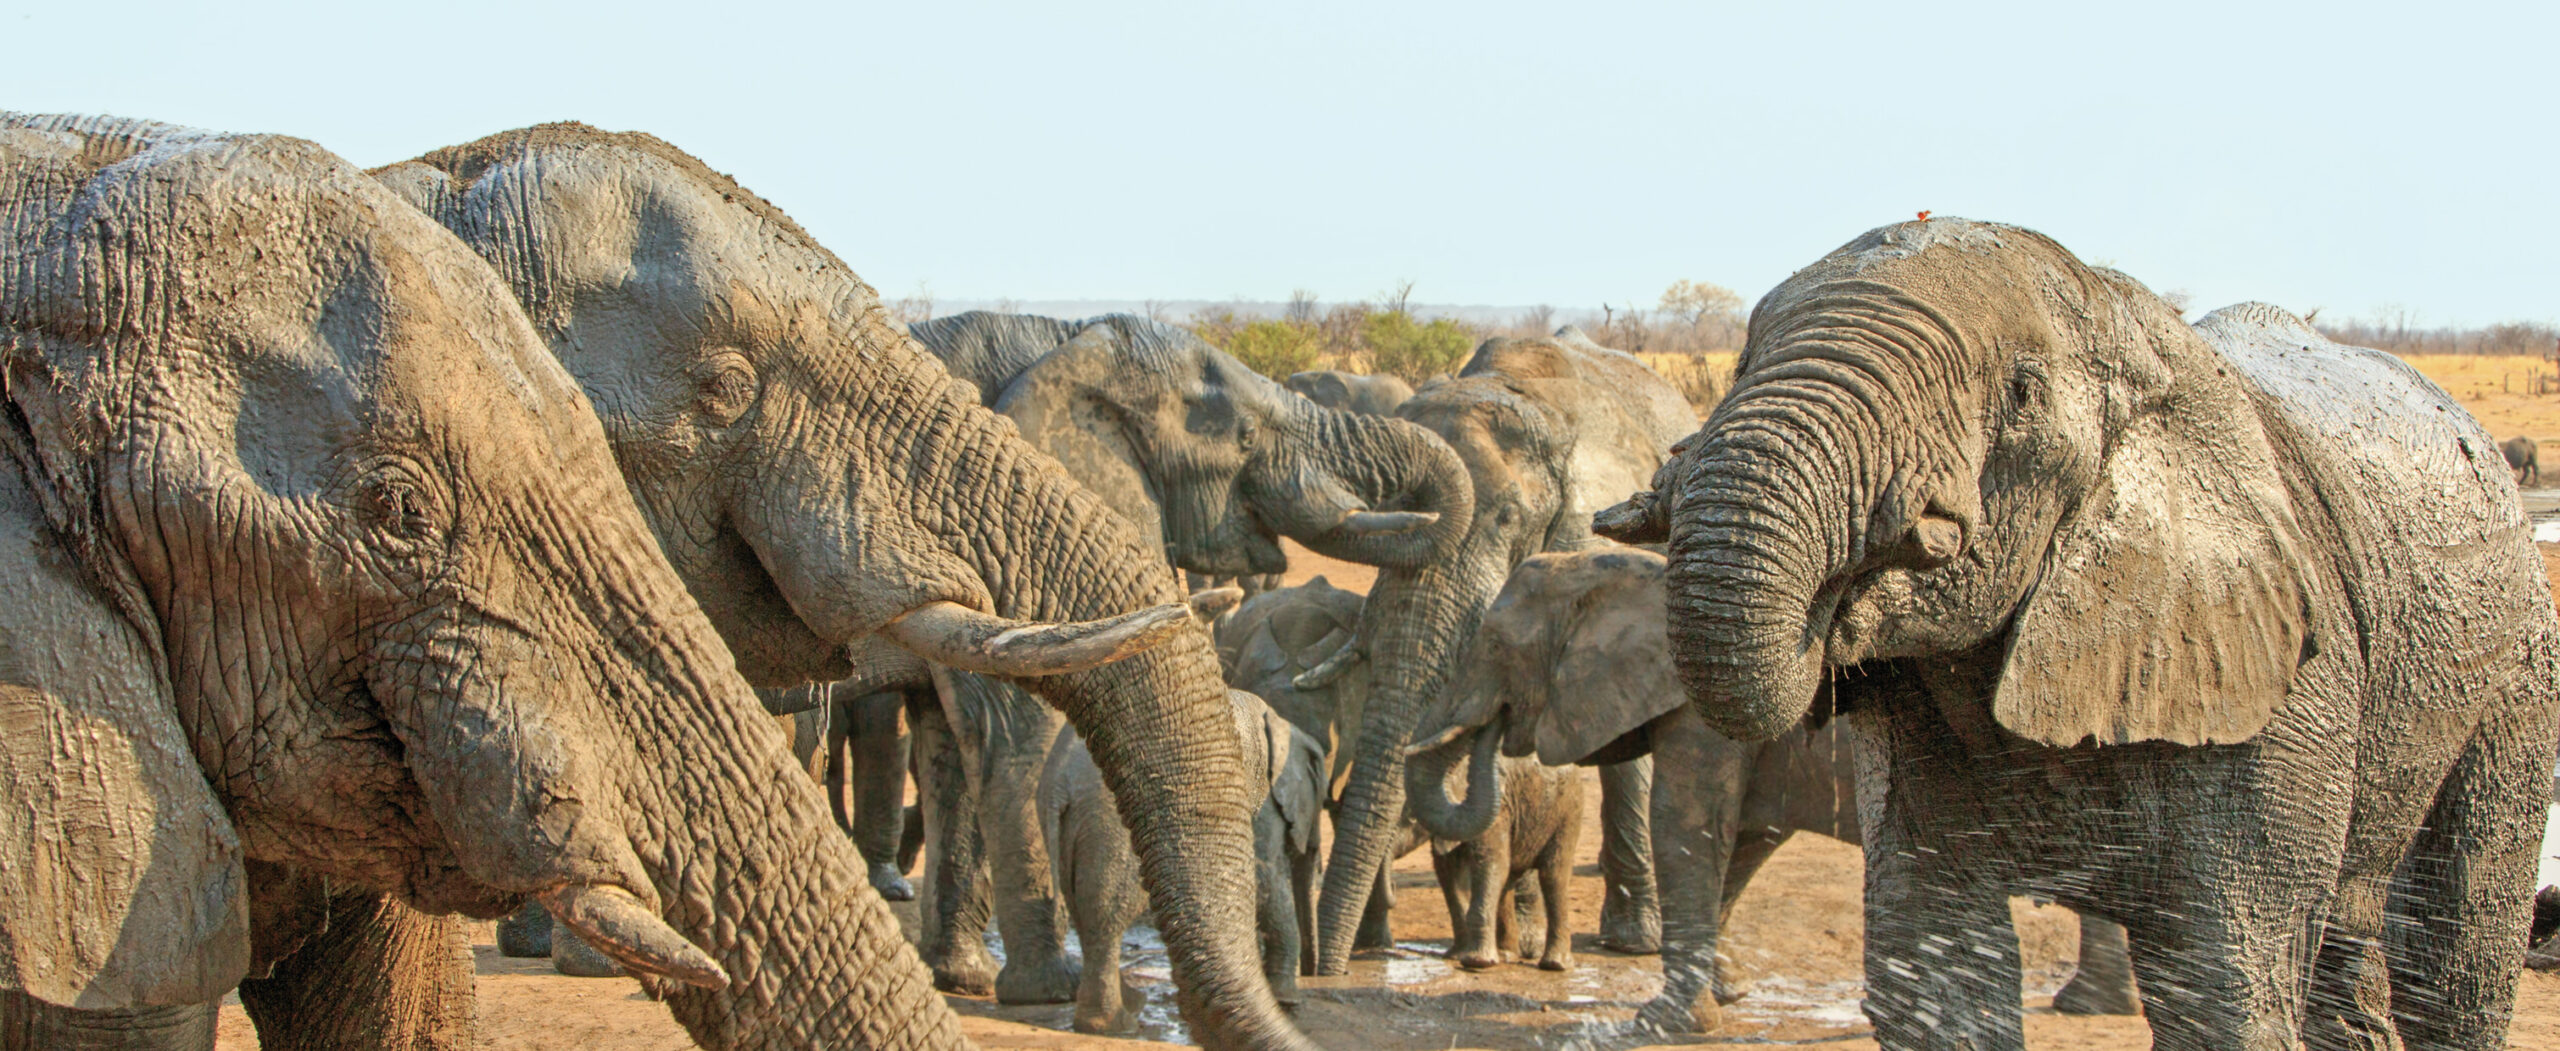 A group of elephants stand together